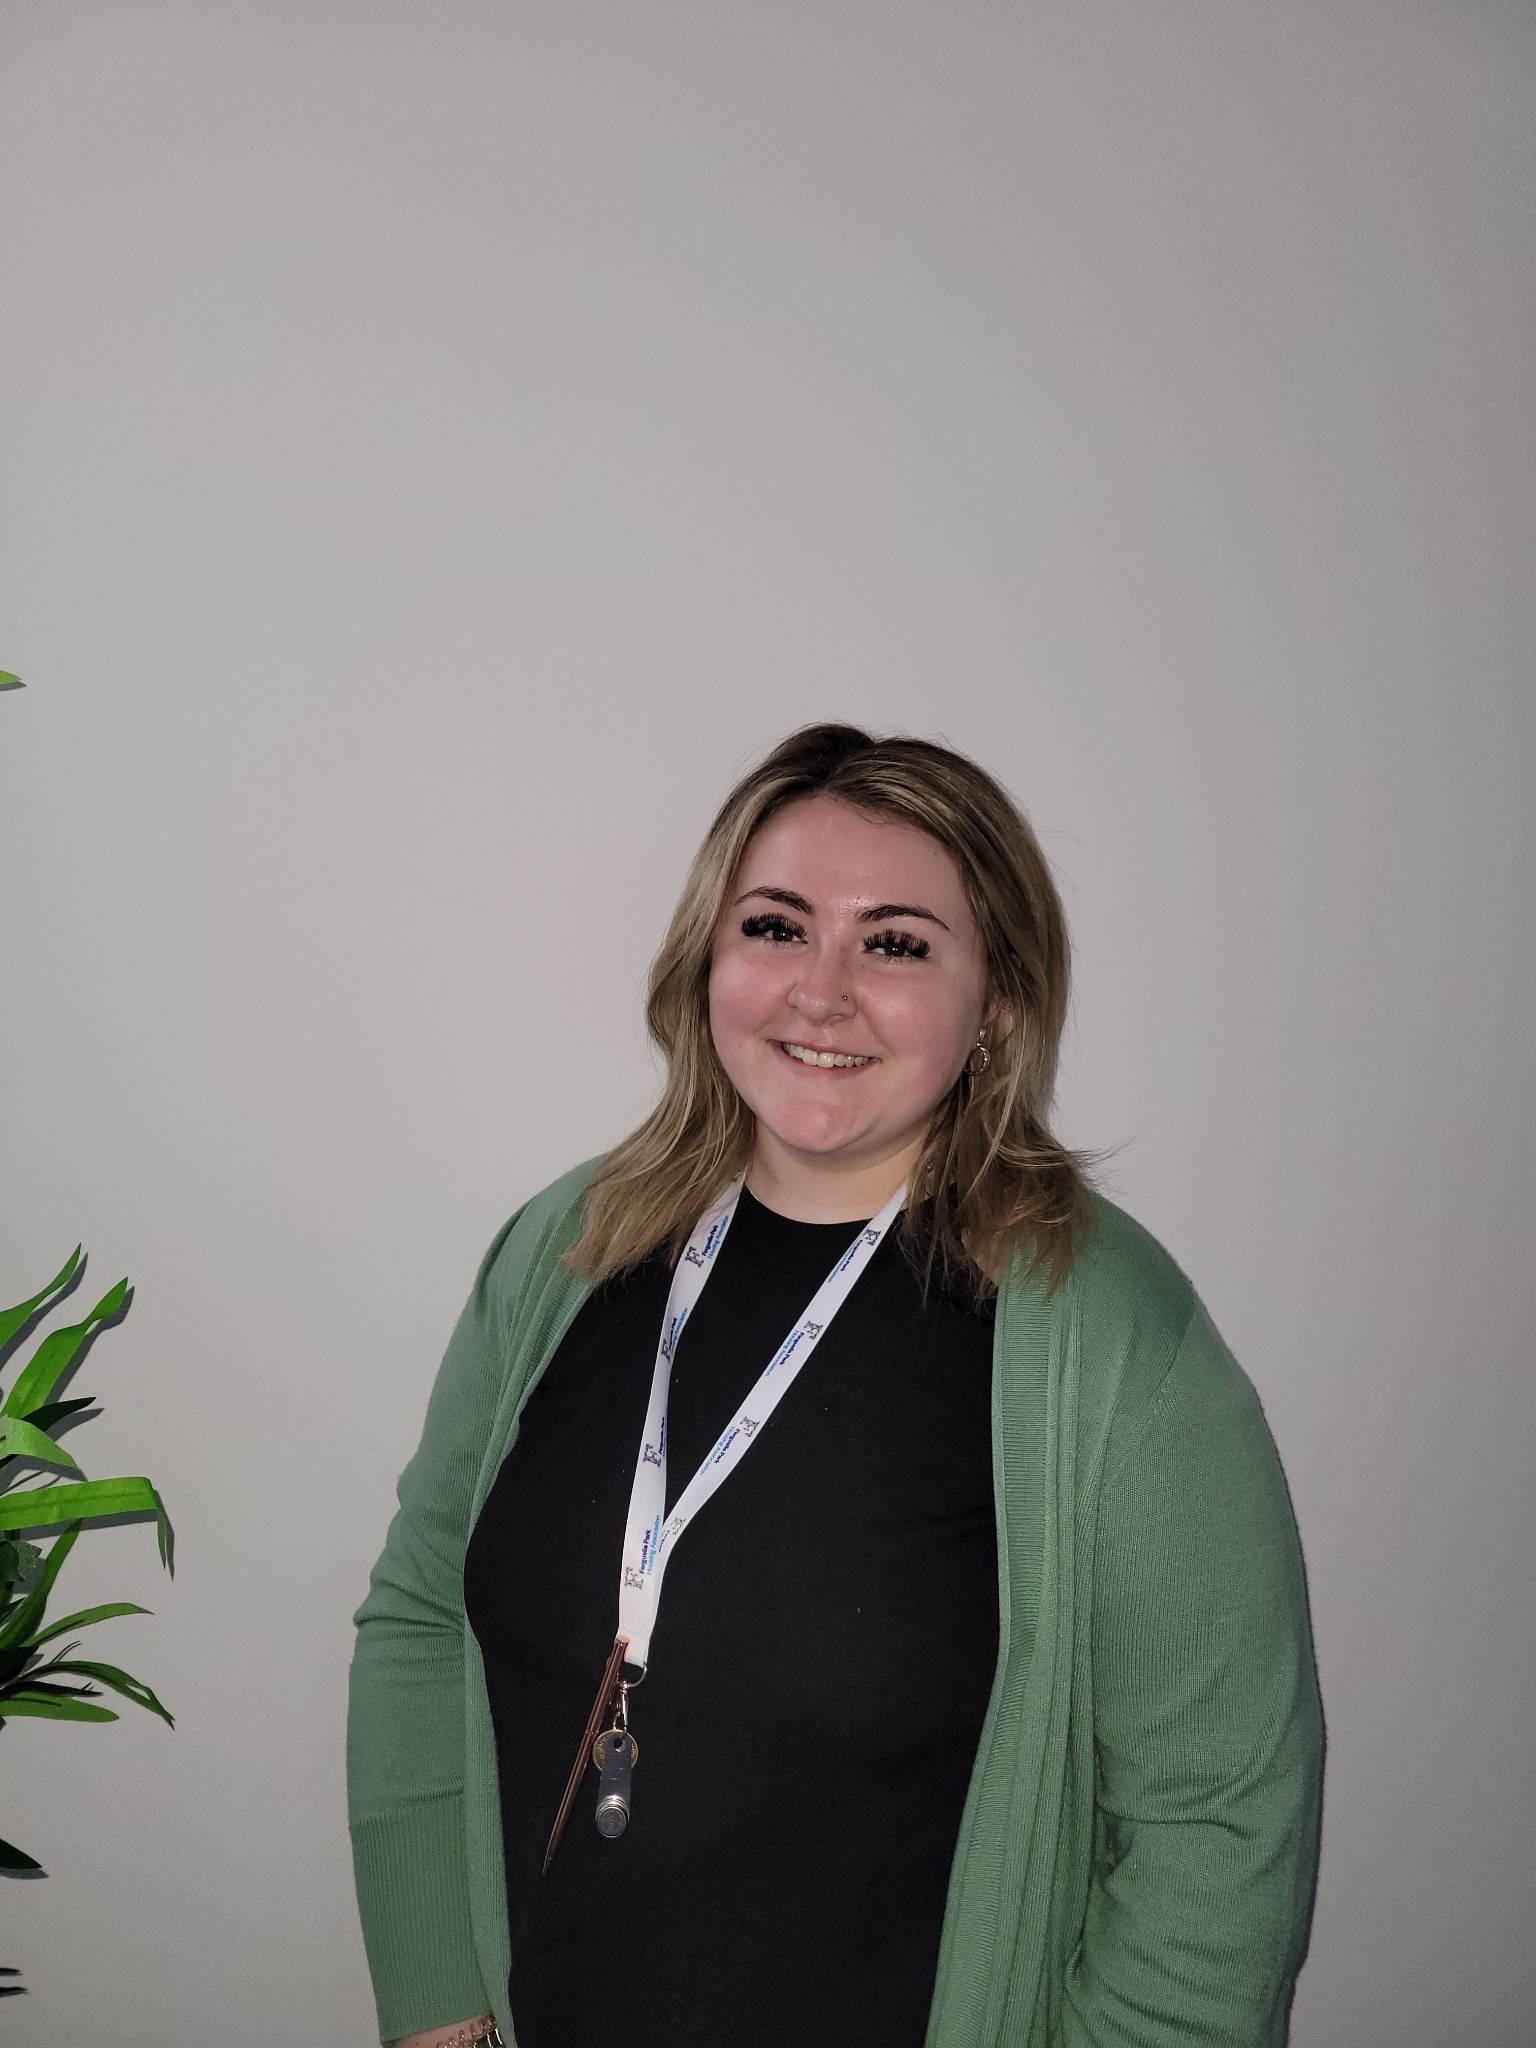 Heather Duffus, Corporate Customer Services Assistant